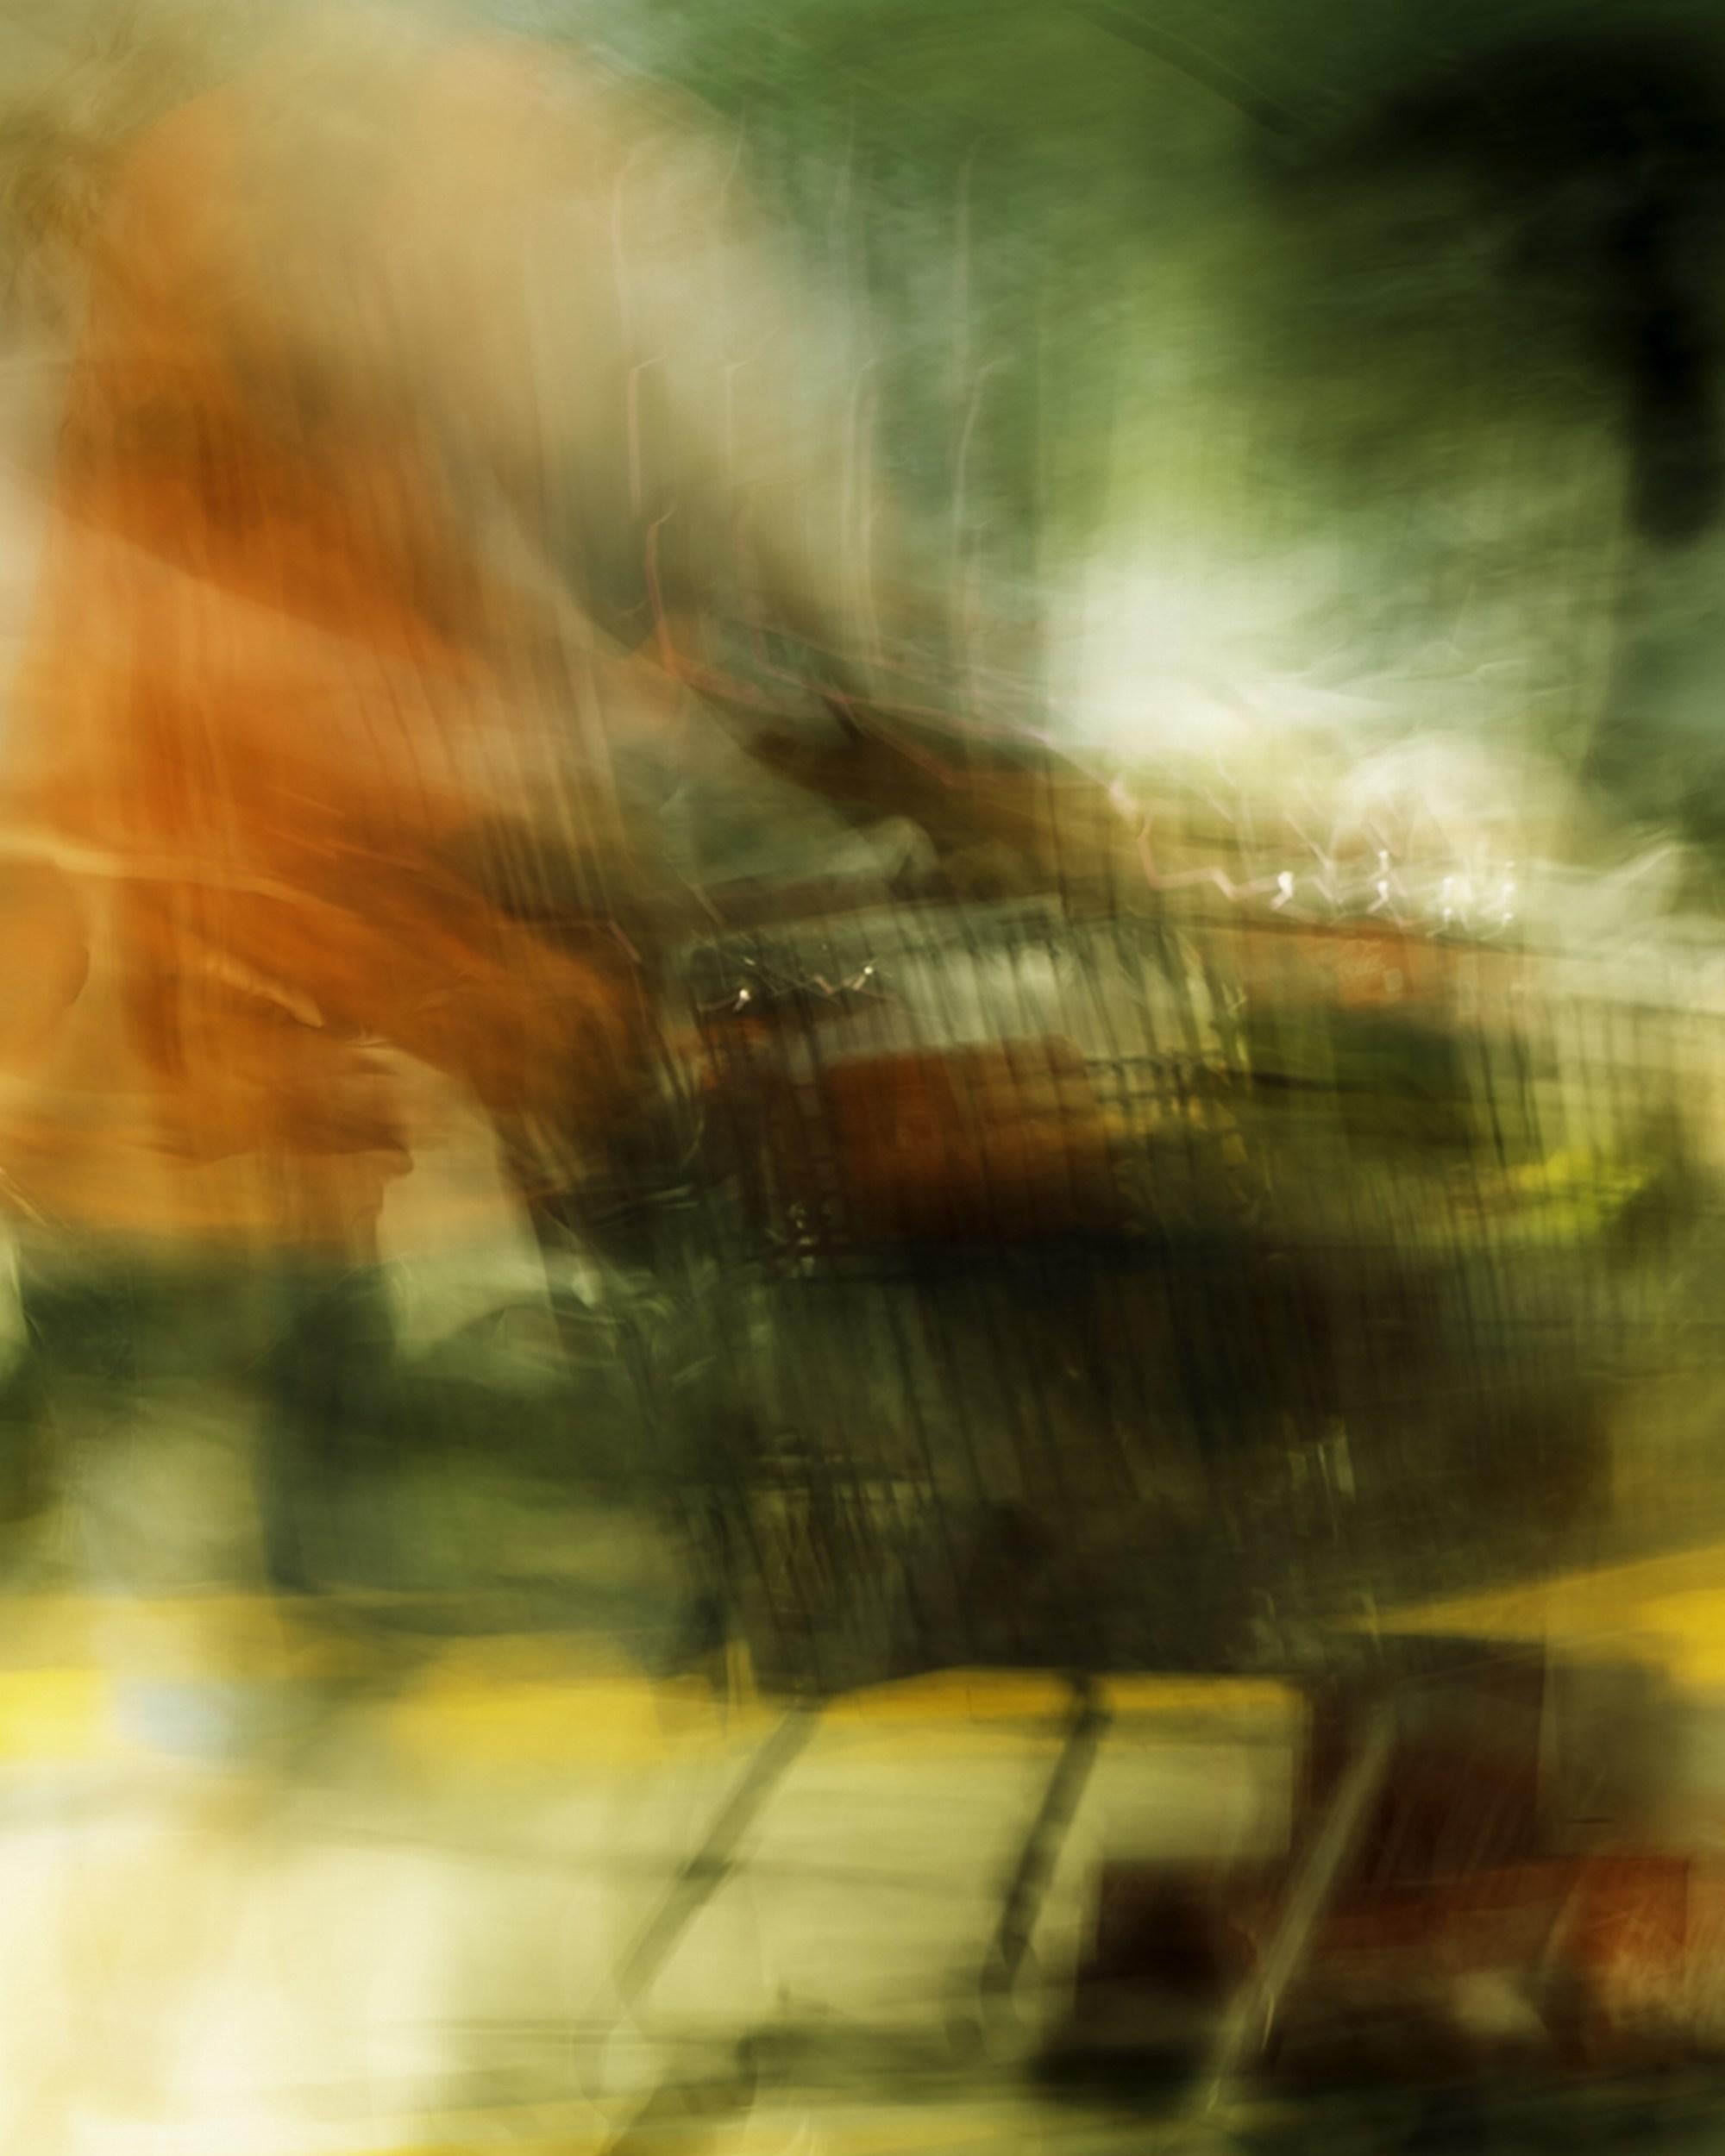 Jeffrey Tamblyn Abstract Photograph - Hell on Wheels (colorful, abstract, everyday scene, bright colors, motion blur)